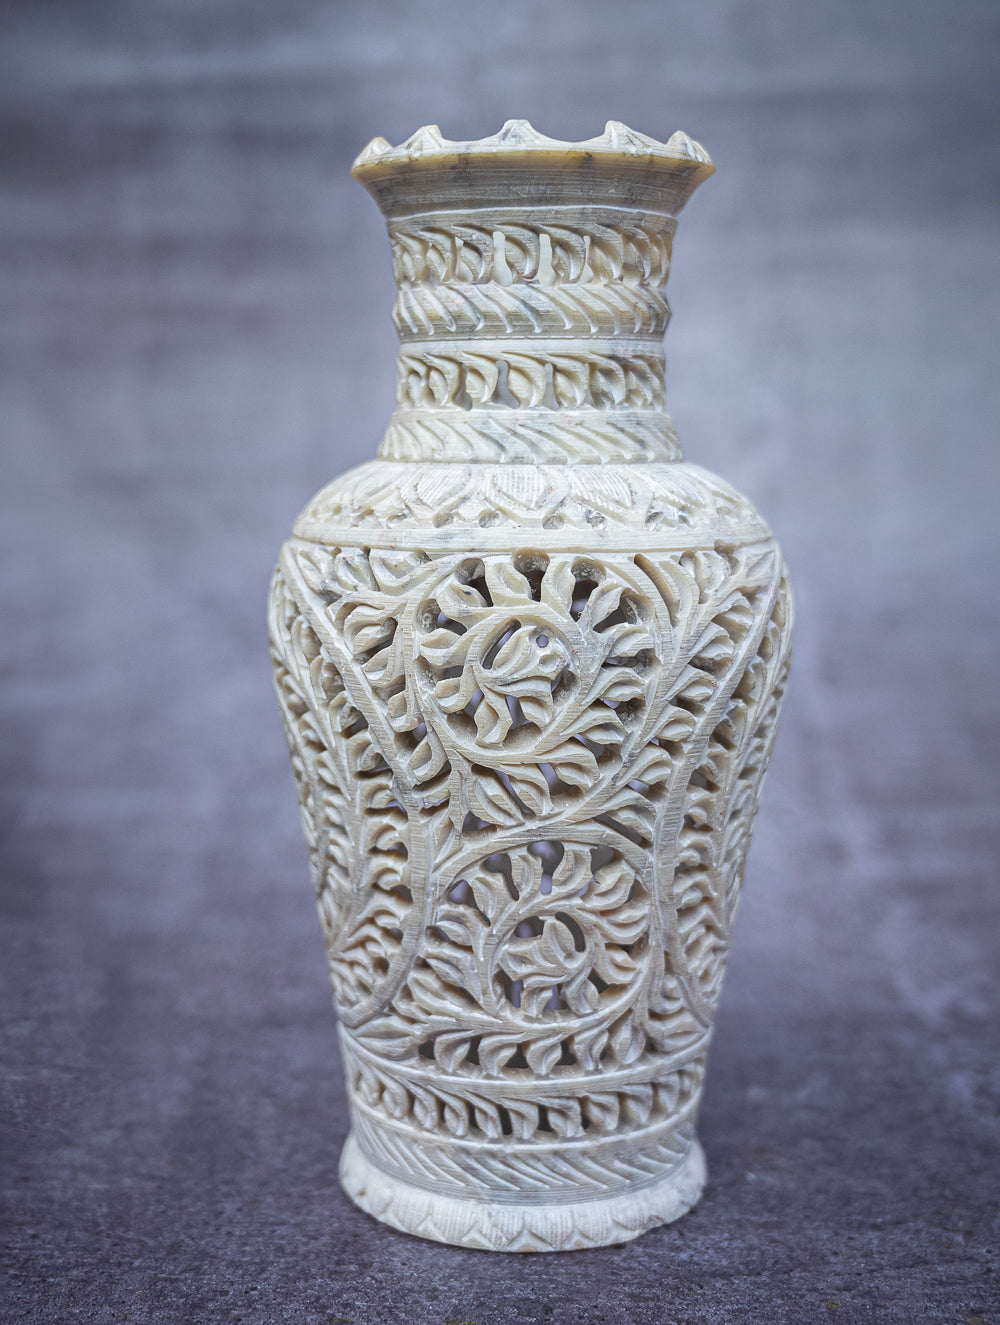 Load image into Gallery viewer, Soapstone Filigree Floral Vase